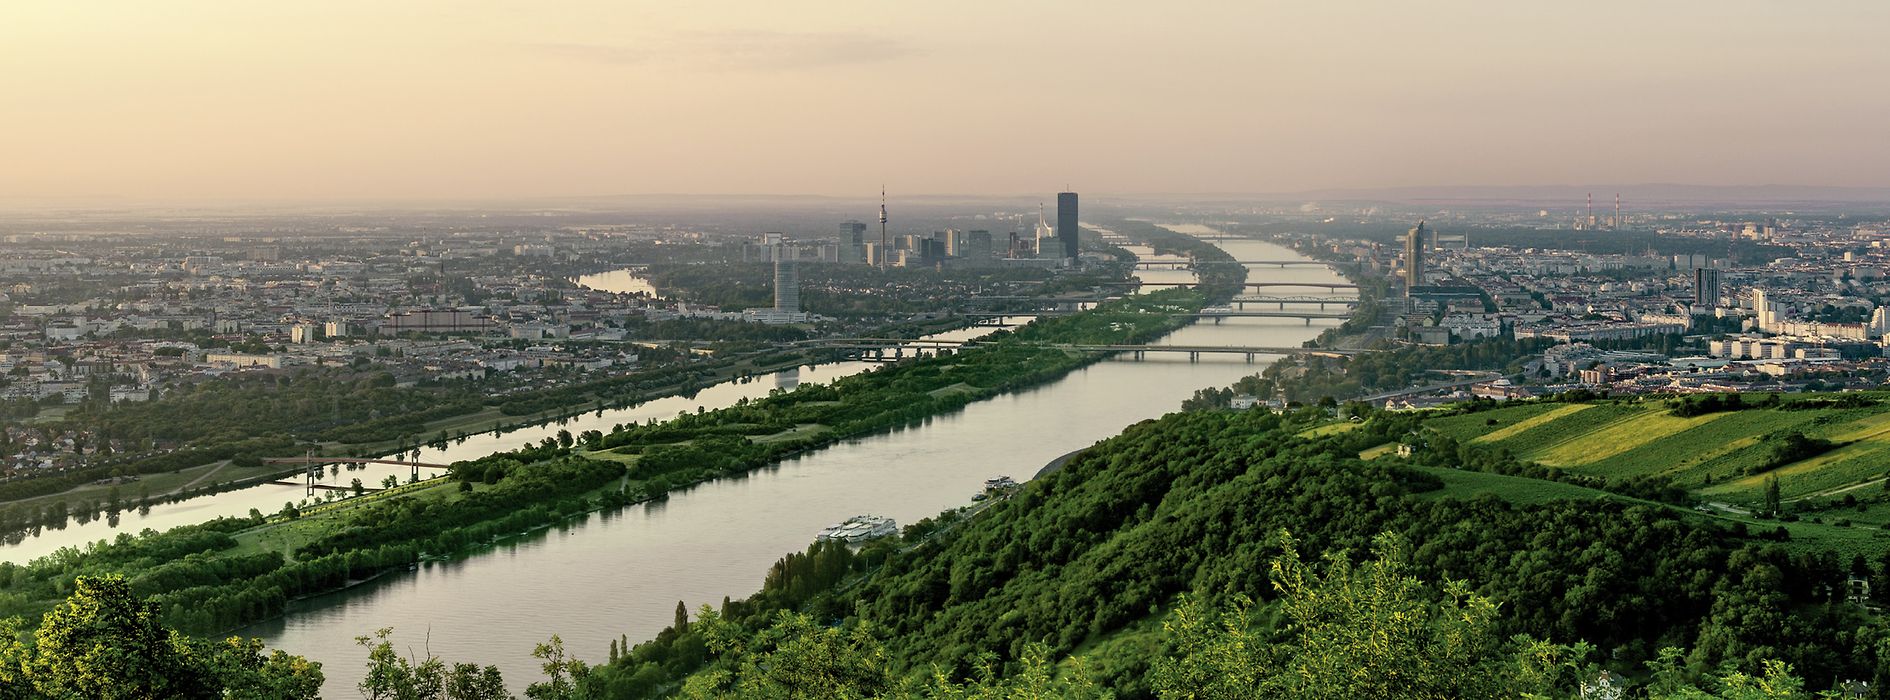 Vienna and the danube Island from above